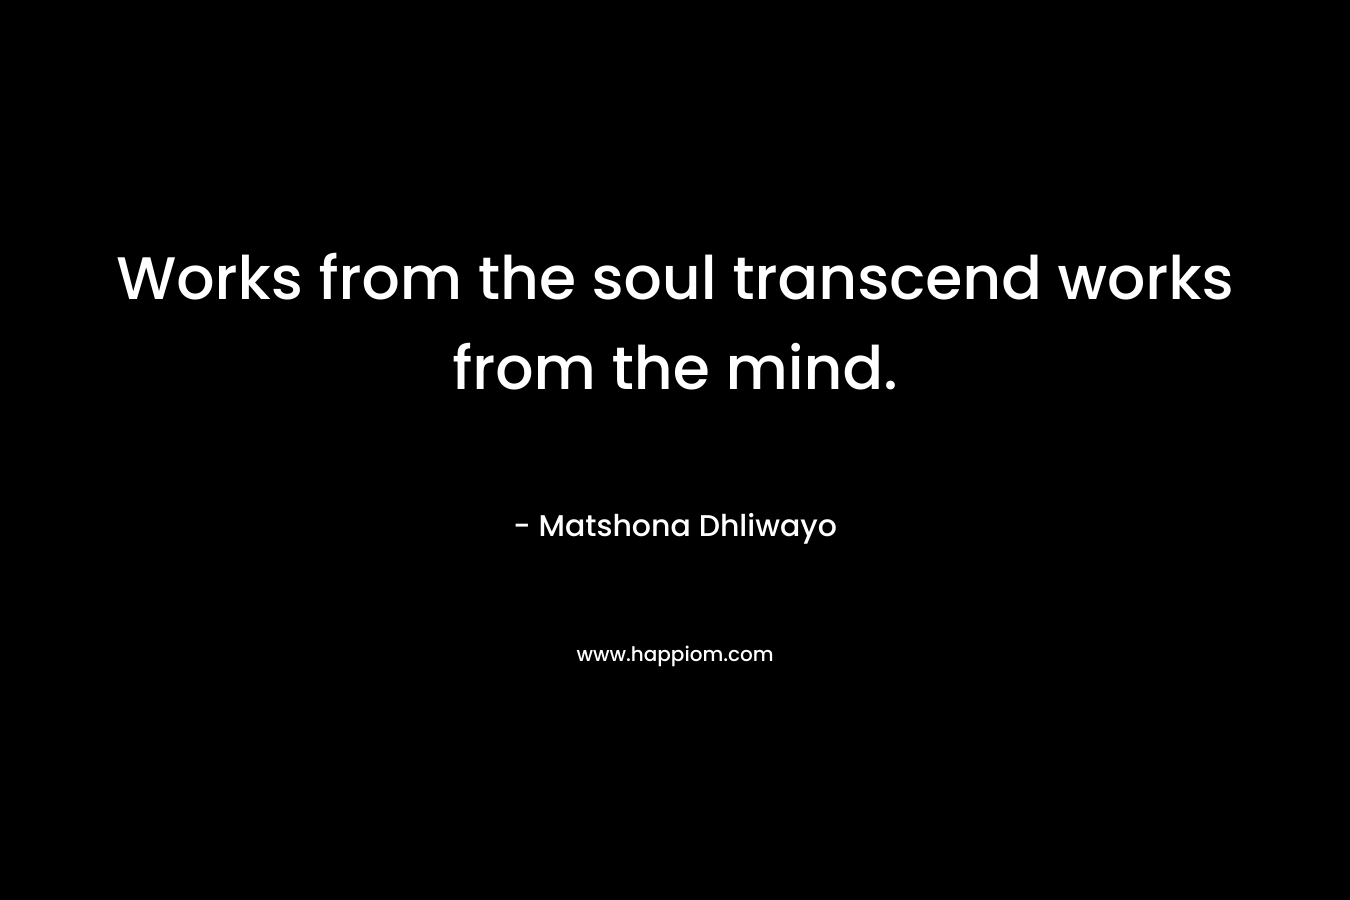 Works from the soul transcend works from the mind.